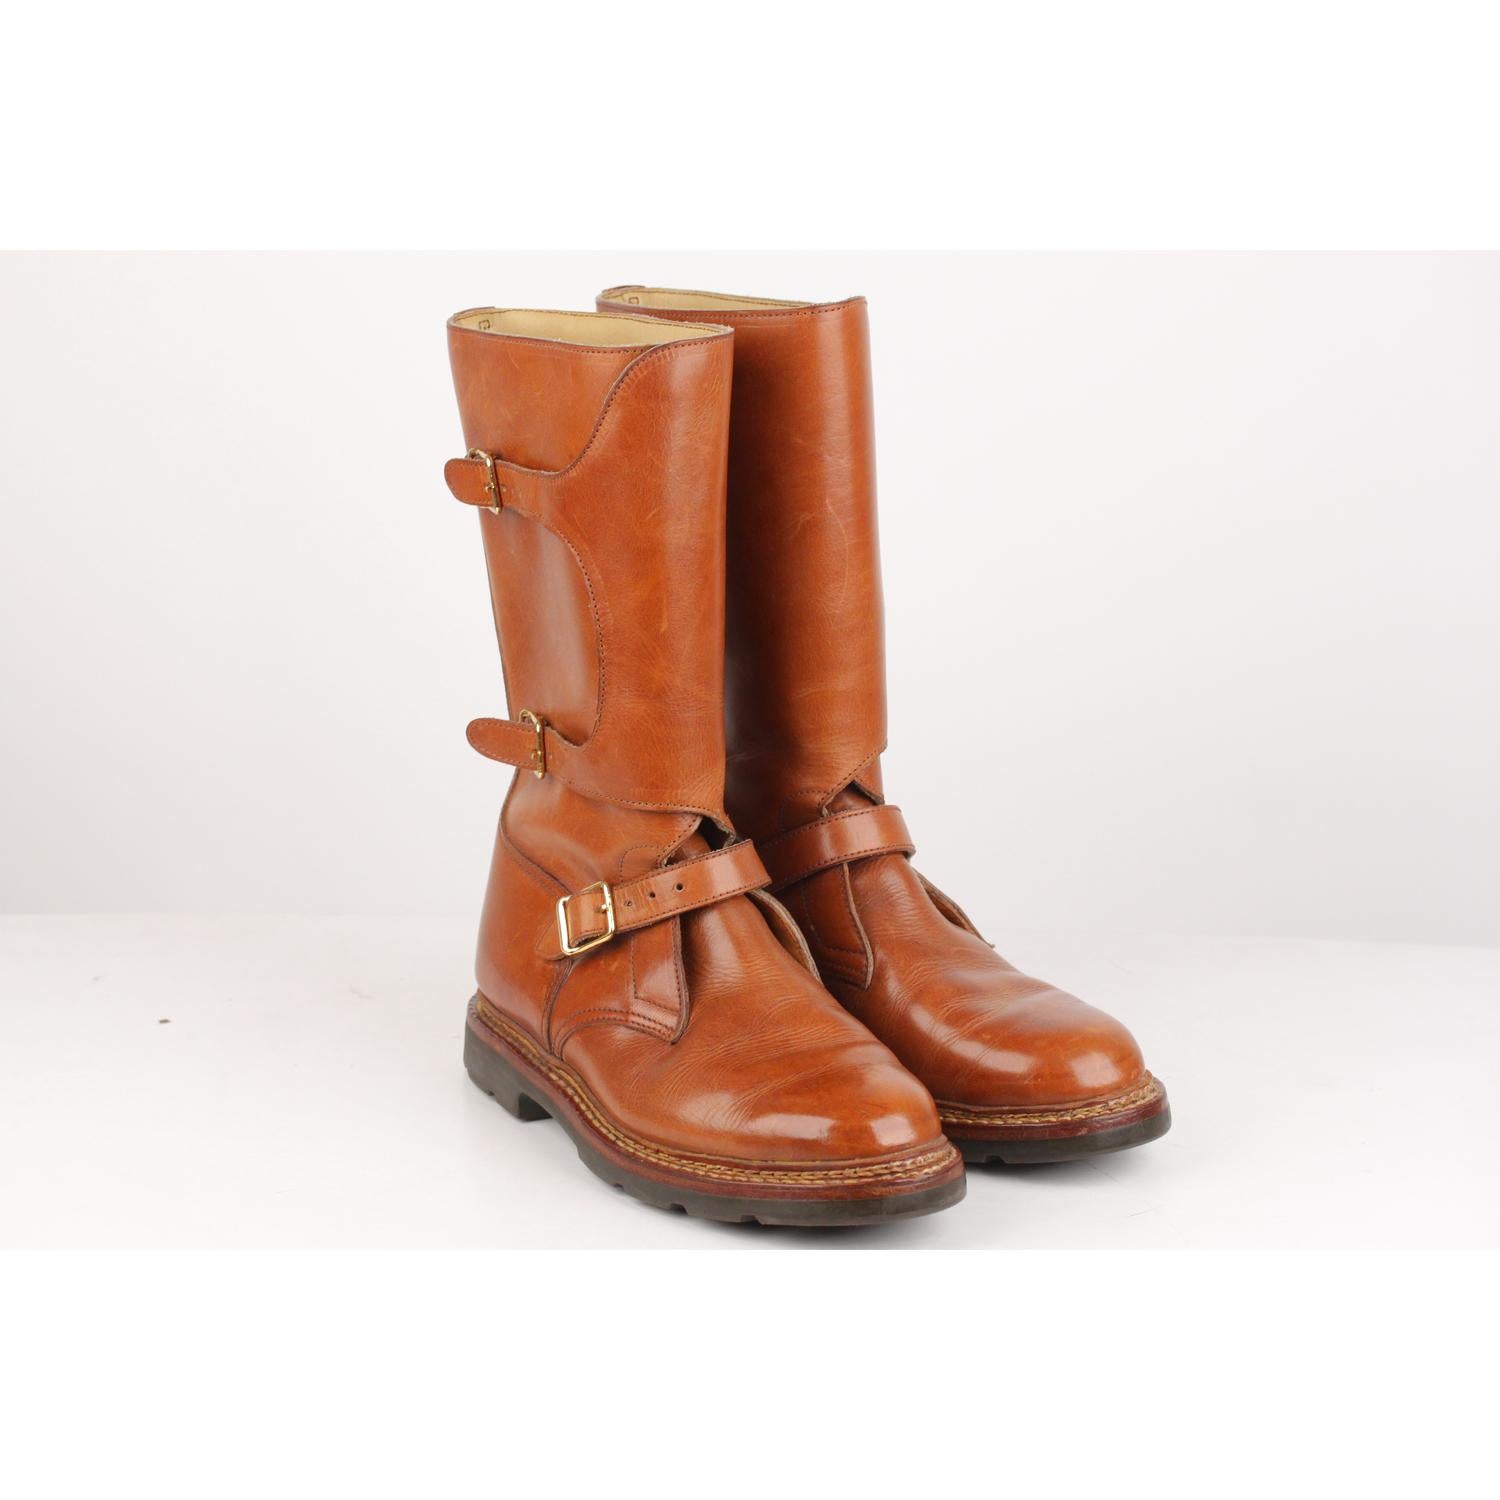 Beautiful men boots by HERMES, biker style, in tan leather. Buckles detailing. Ribber lug soles. Size 41. Outsoles lenght:  11.5 inches - 29,3 cm